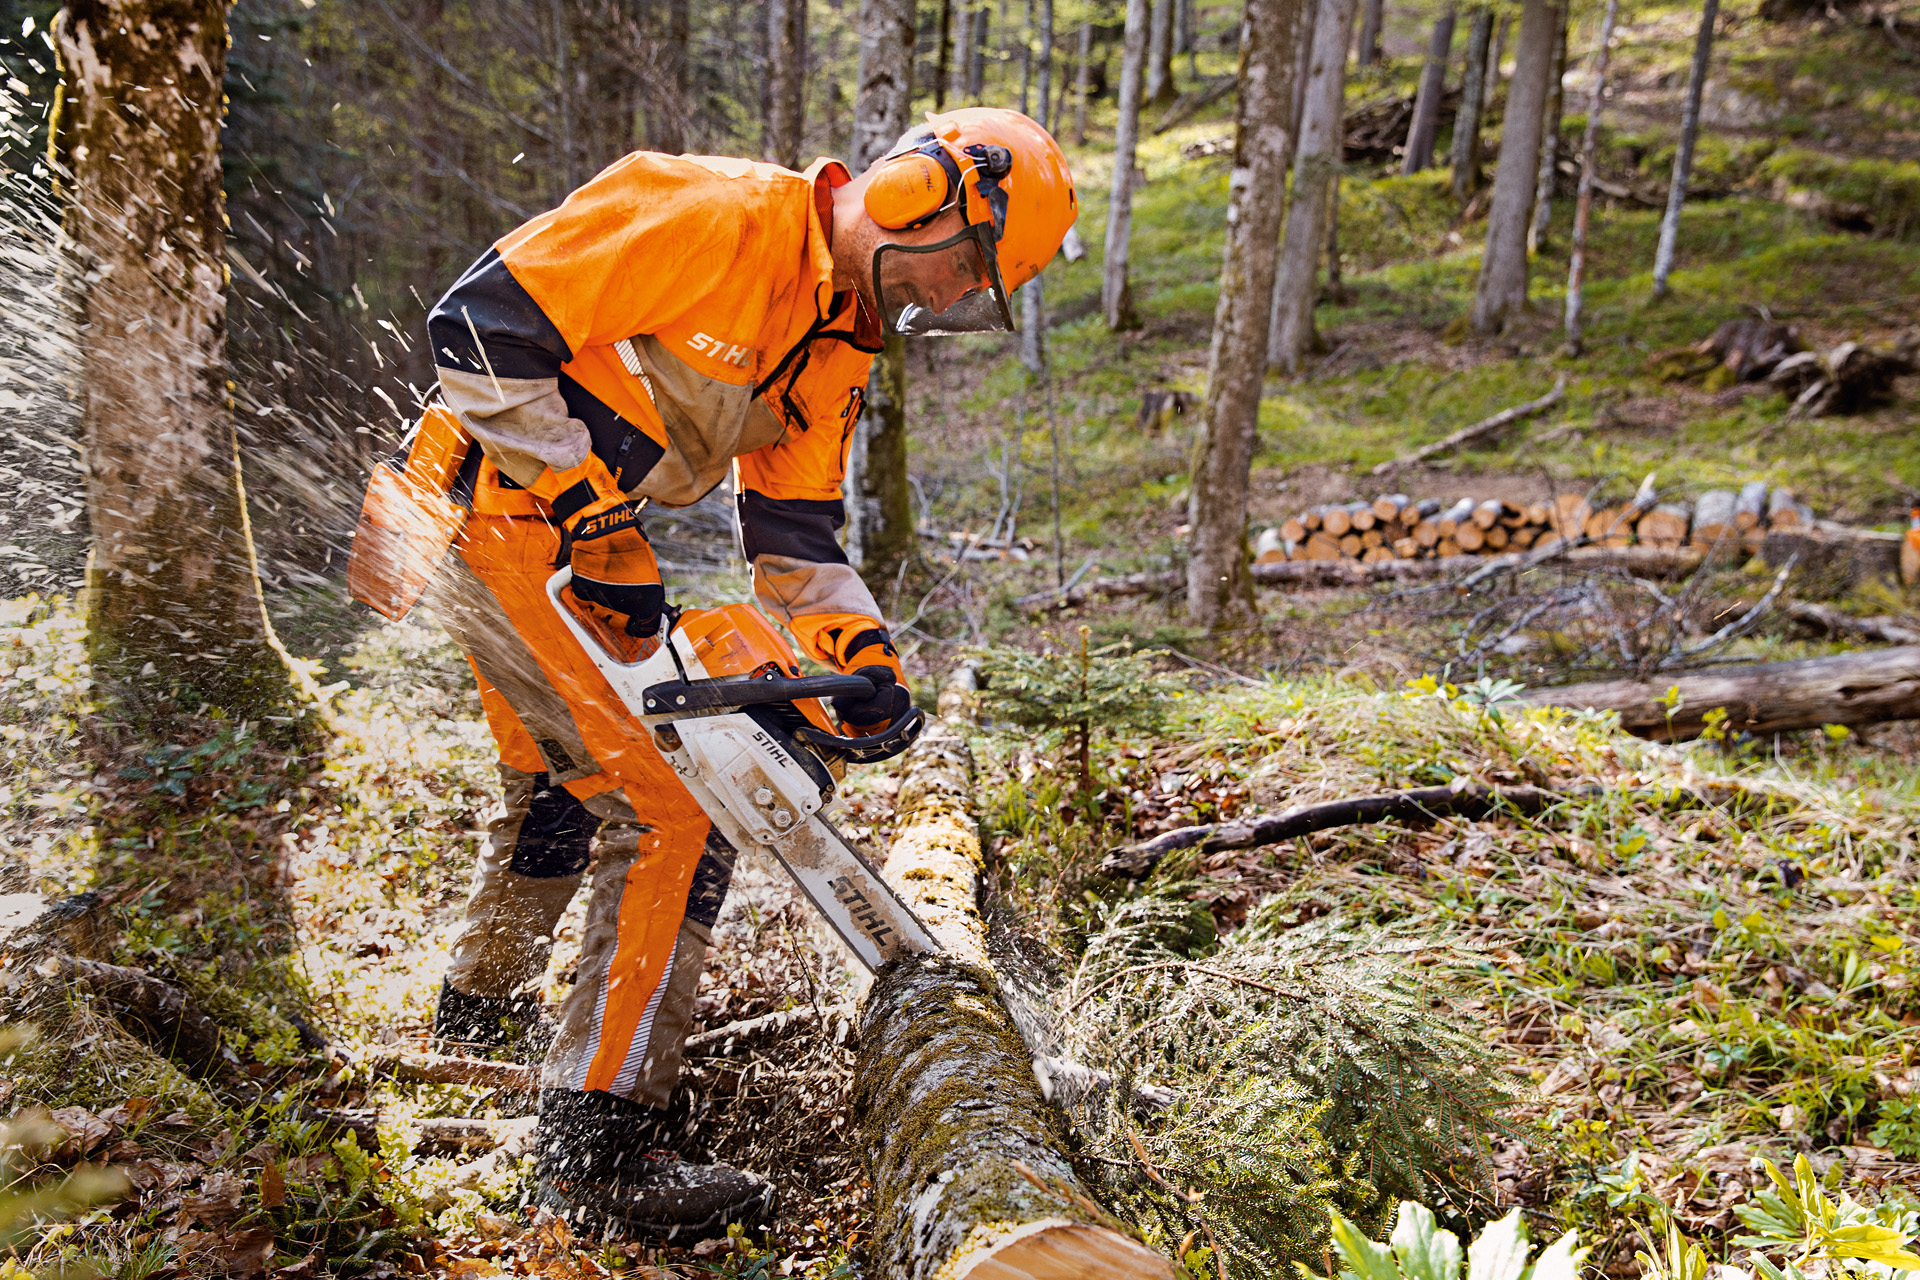 A forestry worker in STIHL protective clothing, sawing wood in the forest with a STIHL chainsaw